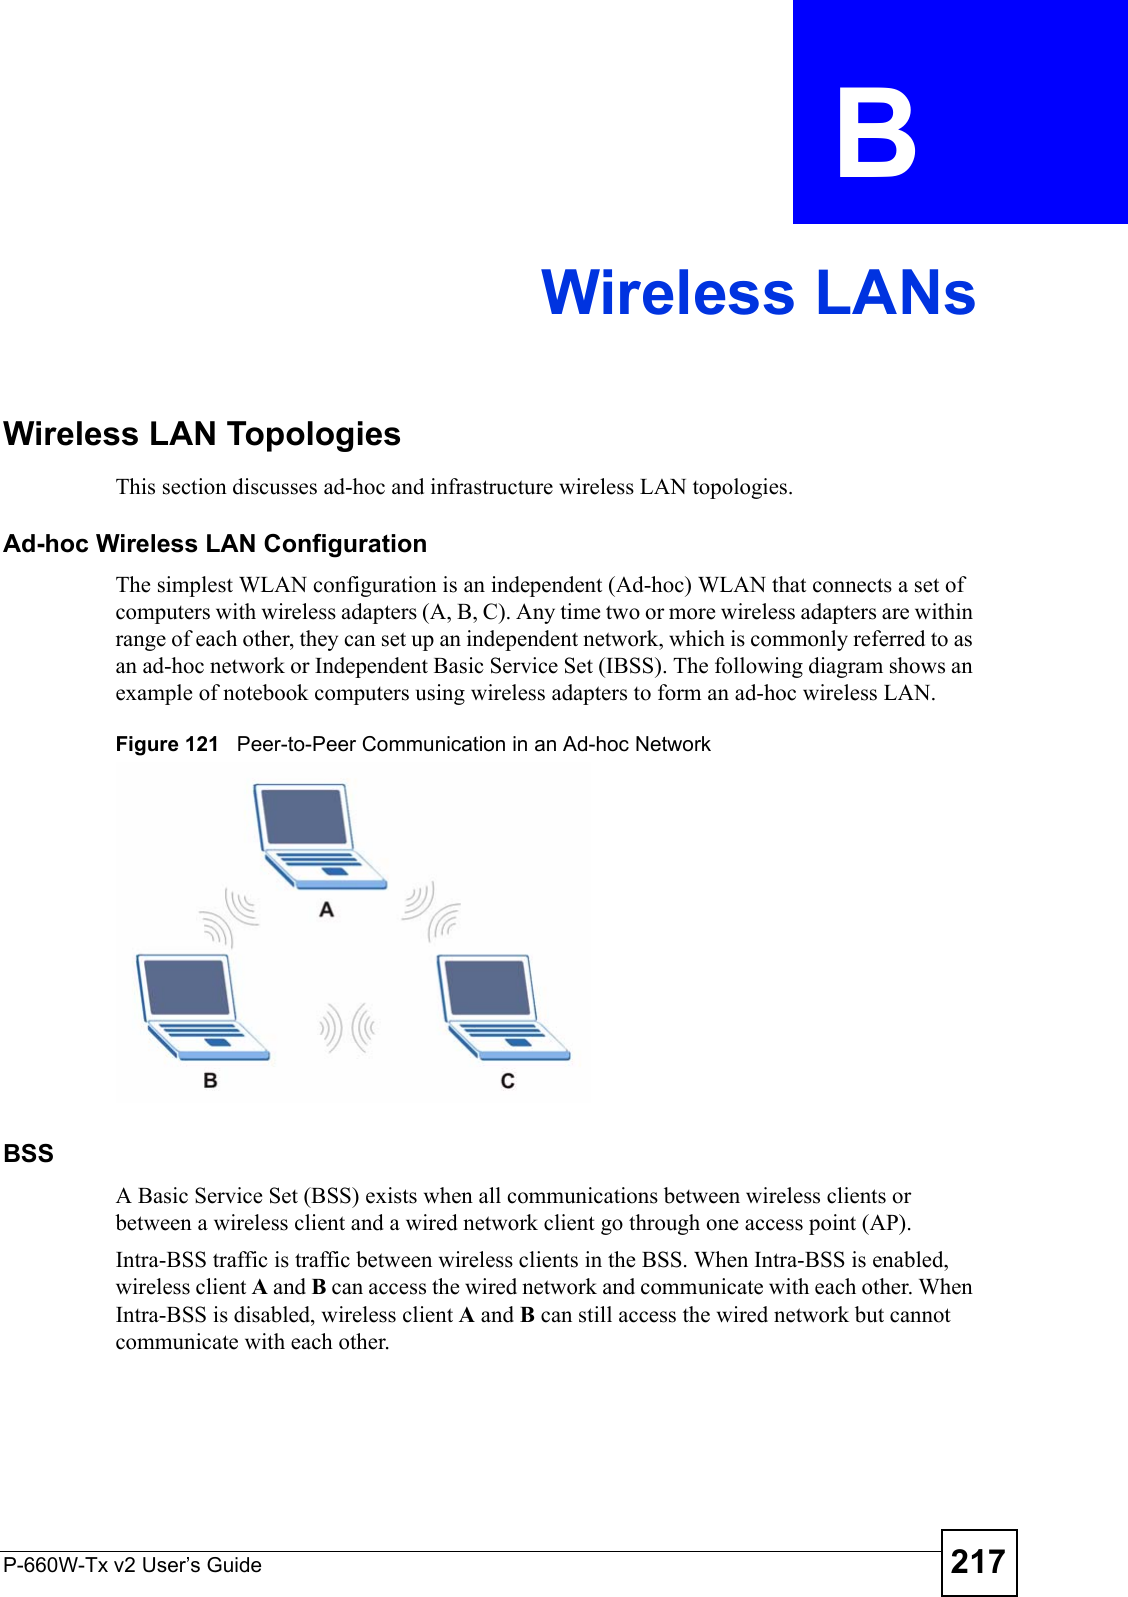 P-660W-Tx v2 User’s Guide 217APPENDIX  B Wireless LANsWireless LAN TopologiesThis section discusses ad-hoc and infrastructure wireless LAN topologies.Ad-hoc Wireless LAN ConfigurationThe simplest WLAN configuration is an independent (Ad-hoc) WLAN that connects a set of computers with wireless adapters (A, B, C). Any time two or more wireless adapters are within range of each other, they can set up an independent network, which is commonly referred to as an ad-hoc network or Independent Basic Service Set (IBSS). The following diagram shows an example of notebook computers using wireless adapters to form an ad-hoc wireless LAN. Figure 121   Peer-to-Peer Communication in an Ad-hoc NetworkBSSA Basic Service Set (BSS) exists when all communications between wireless clients or between a wireless client and a wired network client go through one access point (AP). Intra-BSS traffic is traffic between wireless clients in the BSS. When Intra-BSS is enabled, wireless client A and B can access the wired network and communicate with each other. When Intra-BSS is disabled, wireless client A and B can still access the wired network but cannot communicate with each other.